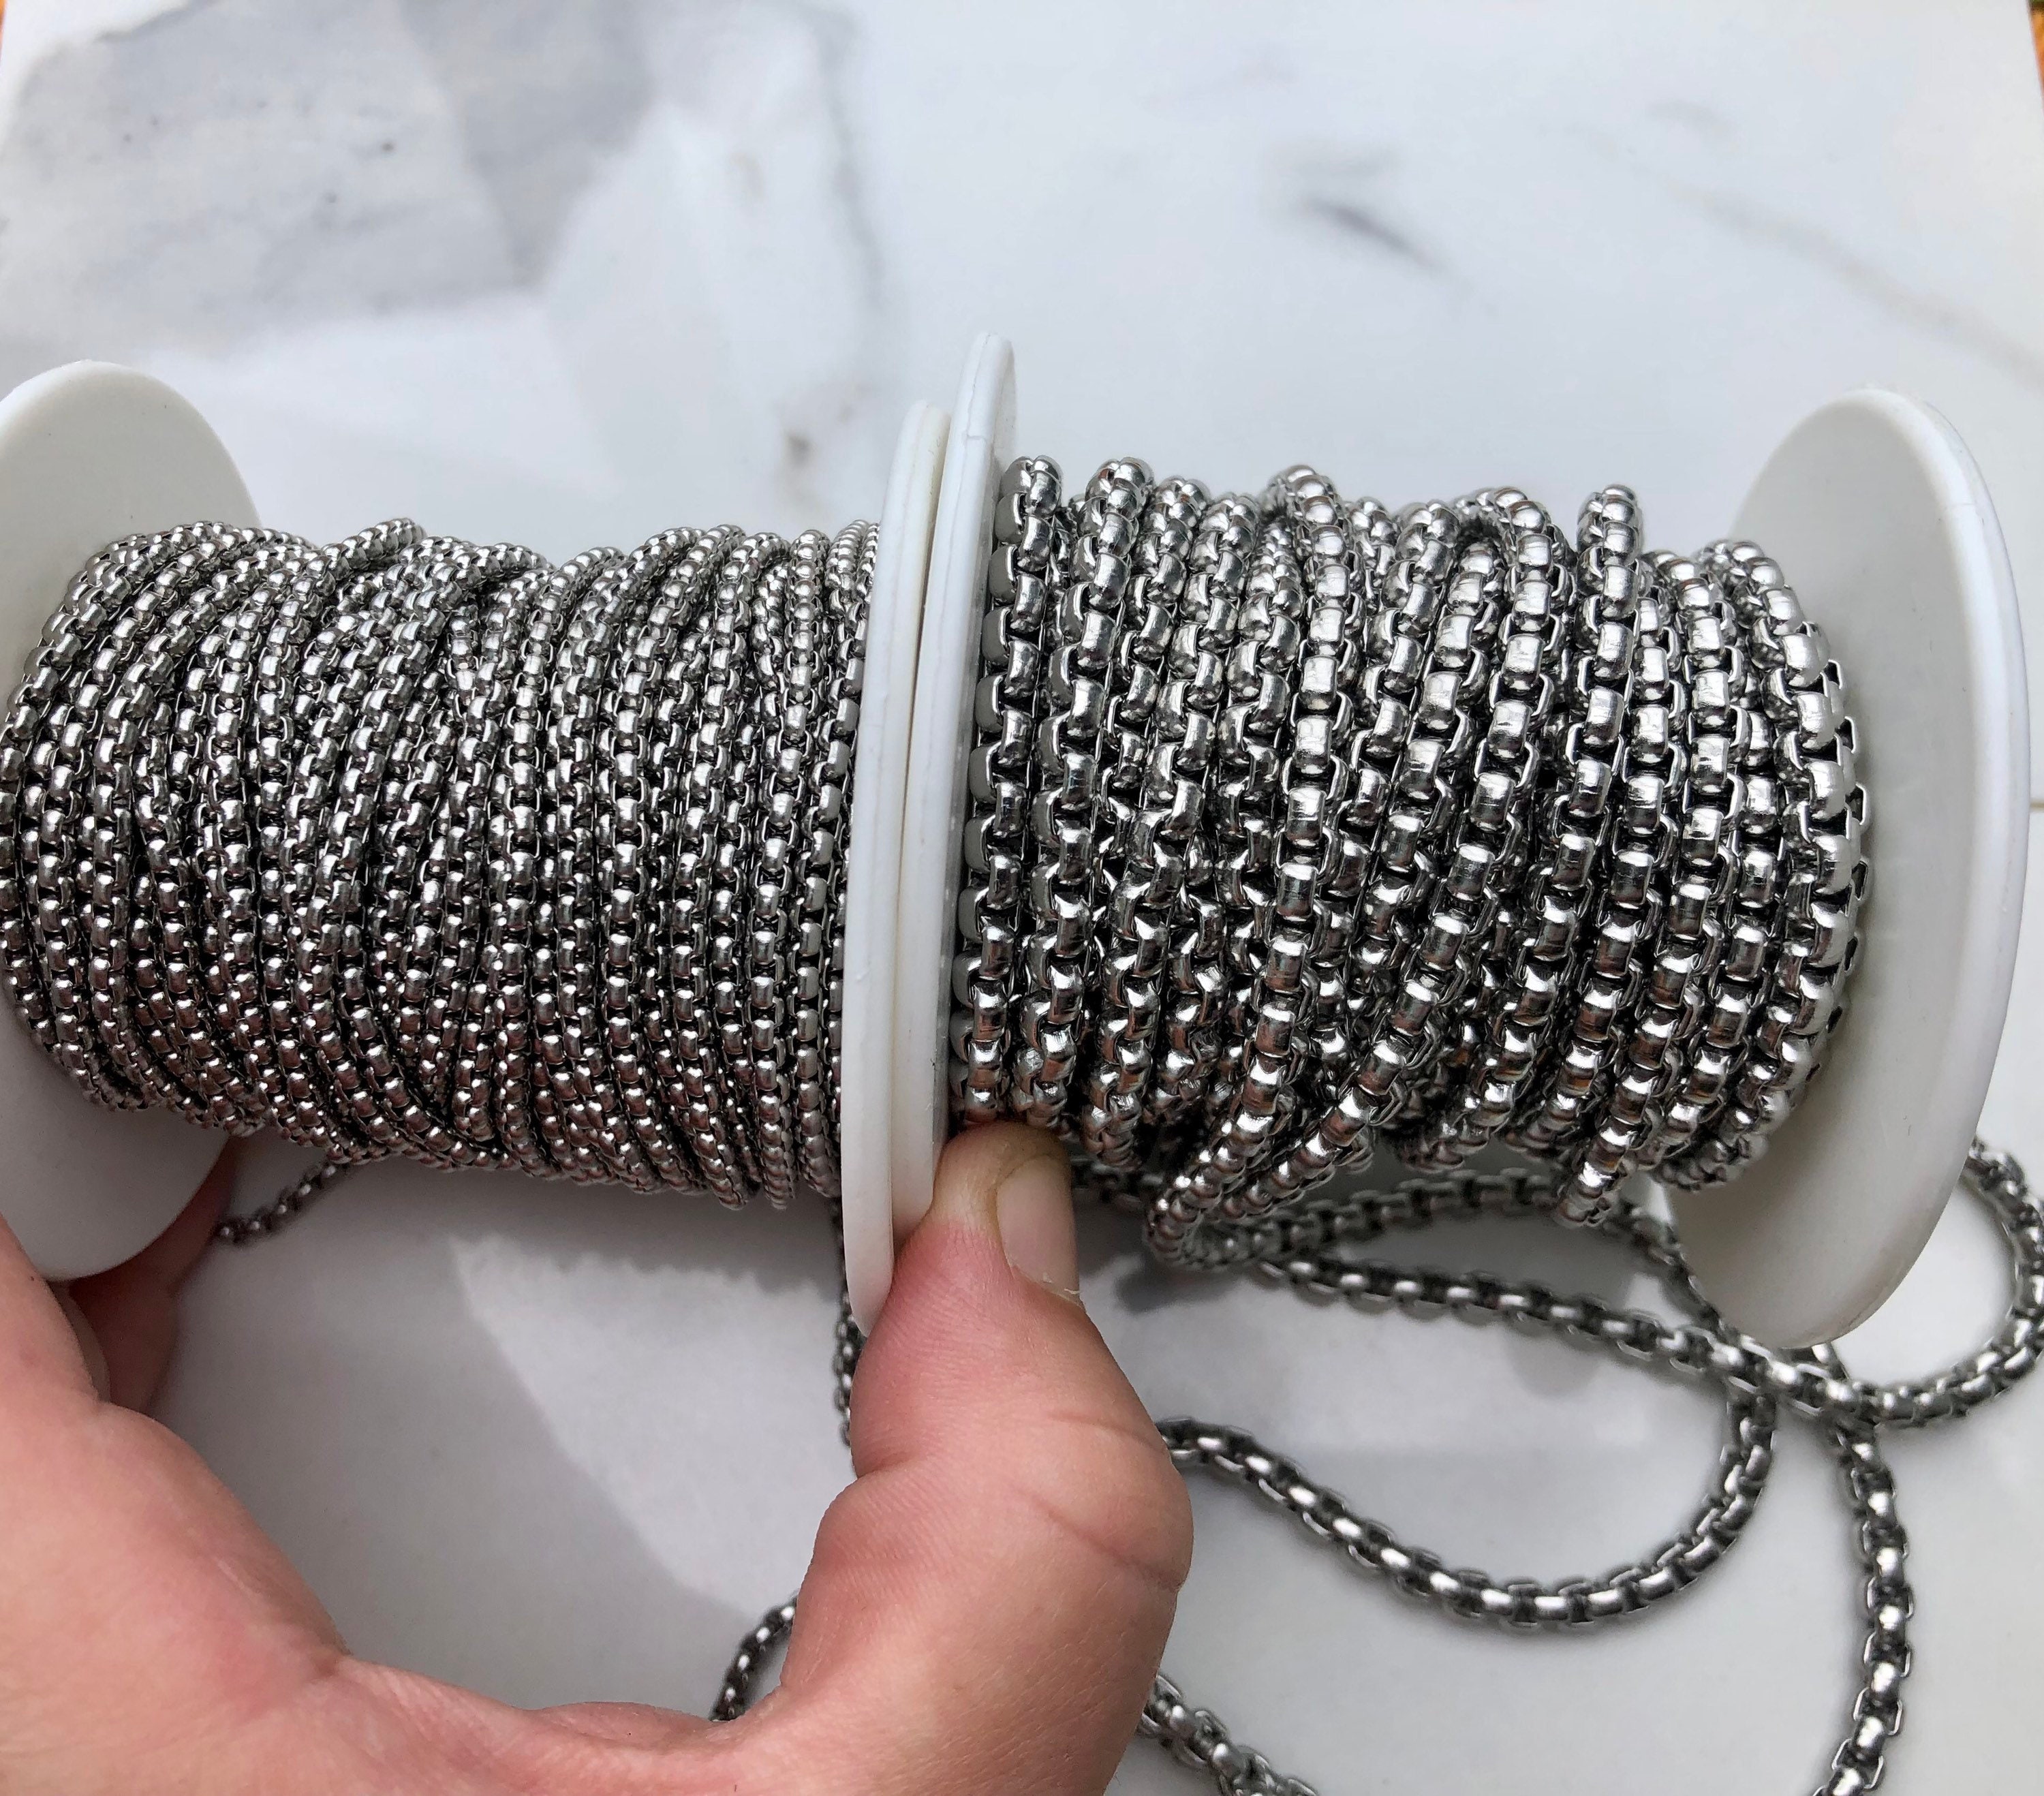 10 Feet Round Box Chain Bulk Wholesale by the Length Yard, Bulk Stainless  Steel Chain, Silver Black Gold Box Chain for Jewelry Making 